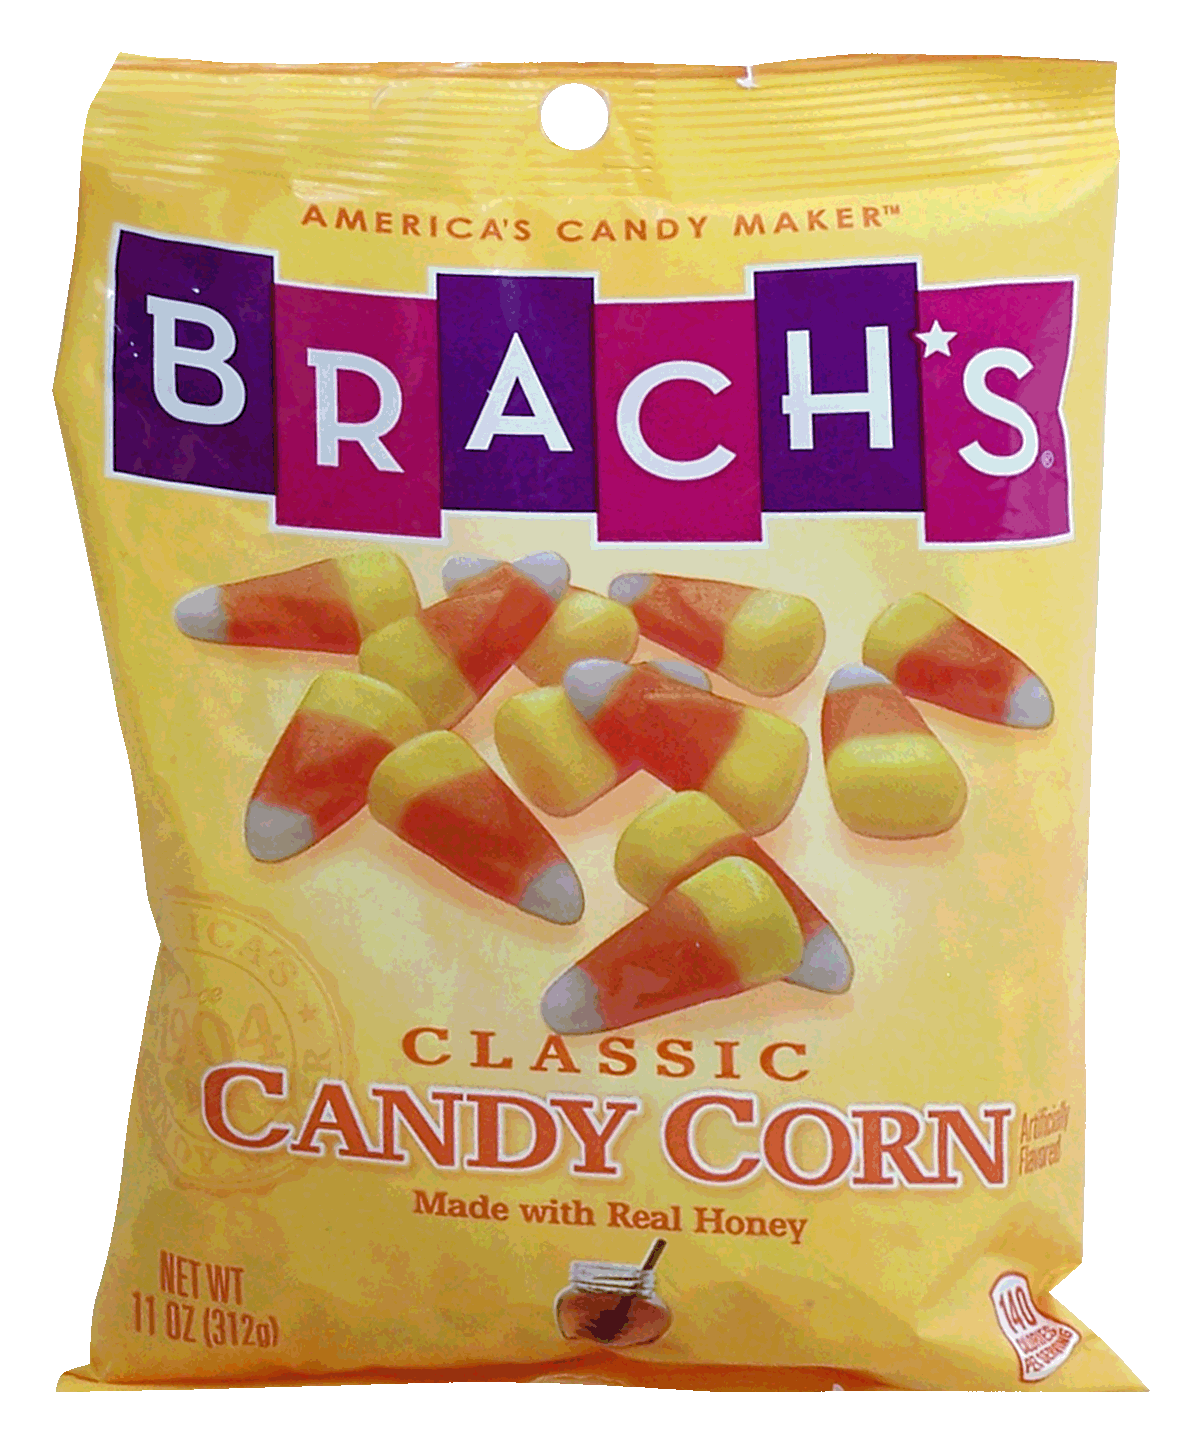  Brach's Classic Candy Corn, Made with Real Honey